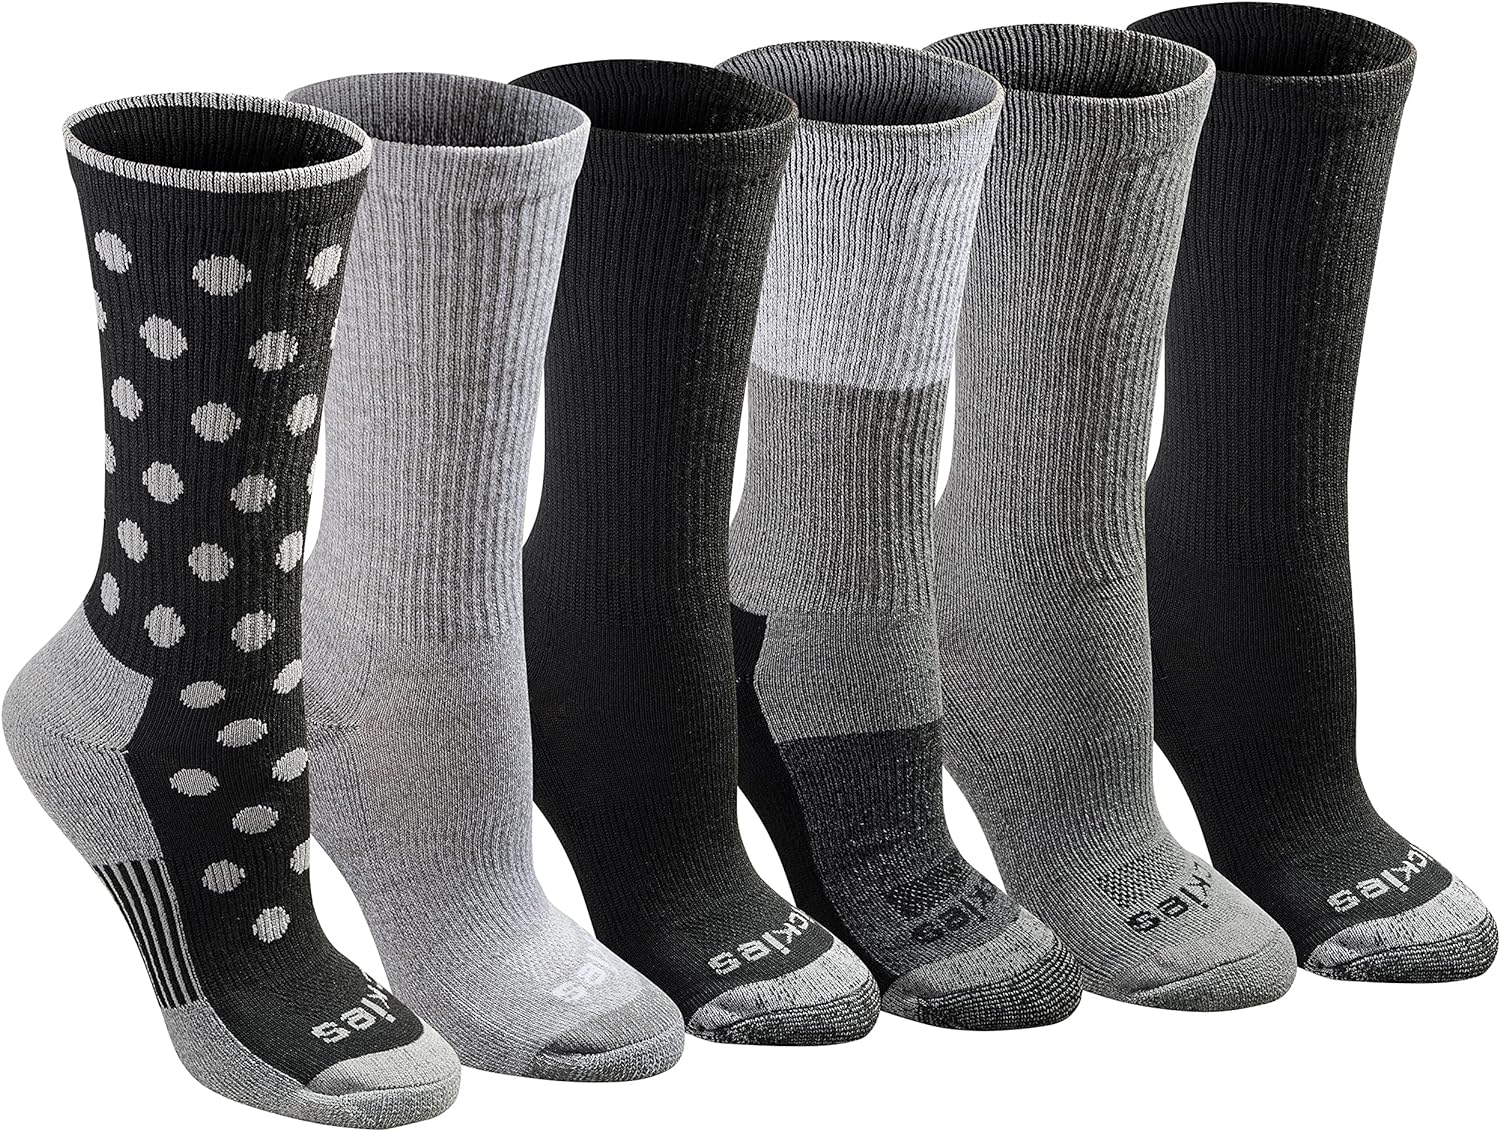 Shop The Latest >Women's Dri-tech Moisture Control Crew Socks Multipack > *Only $18.36*> From The Top Brand > *Dickiesl* > Shop Now and Get Free Shipping On Orders Over $45.00 >*Shop Earth Foot*